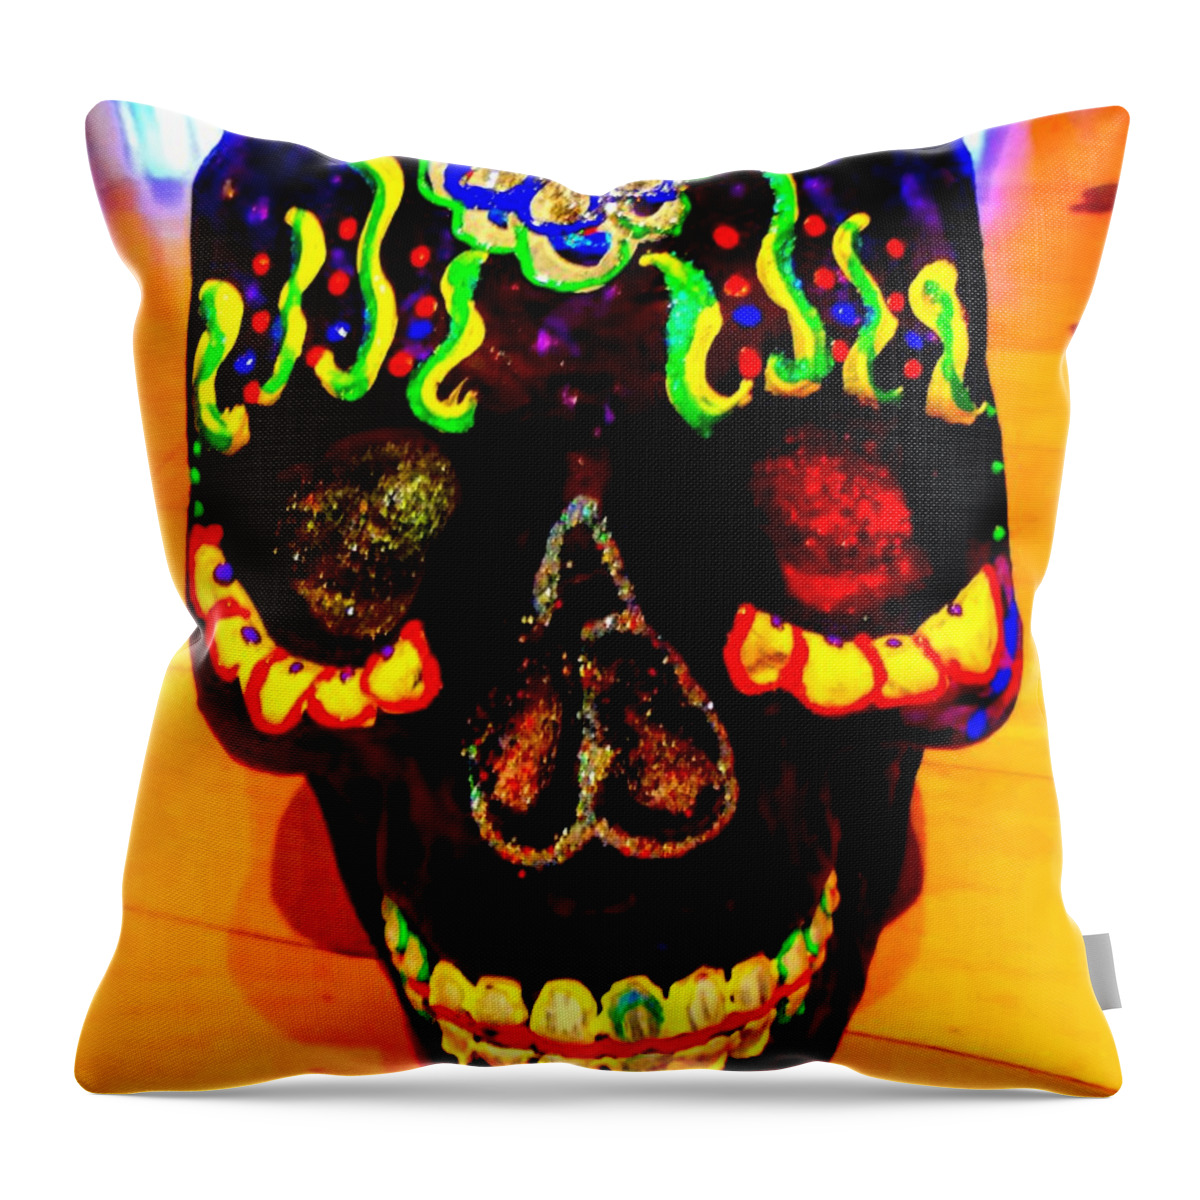 Day Of The Dead Throw Pillow featuring the photograph Day Of The Dead Skull by Randall Weidner